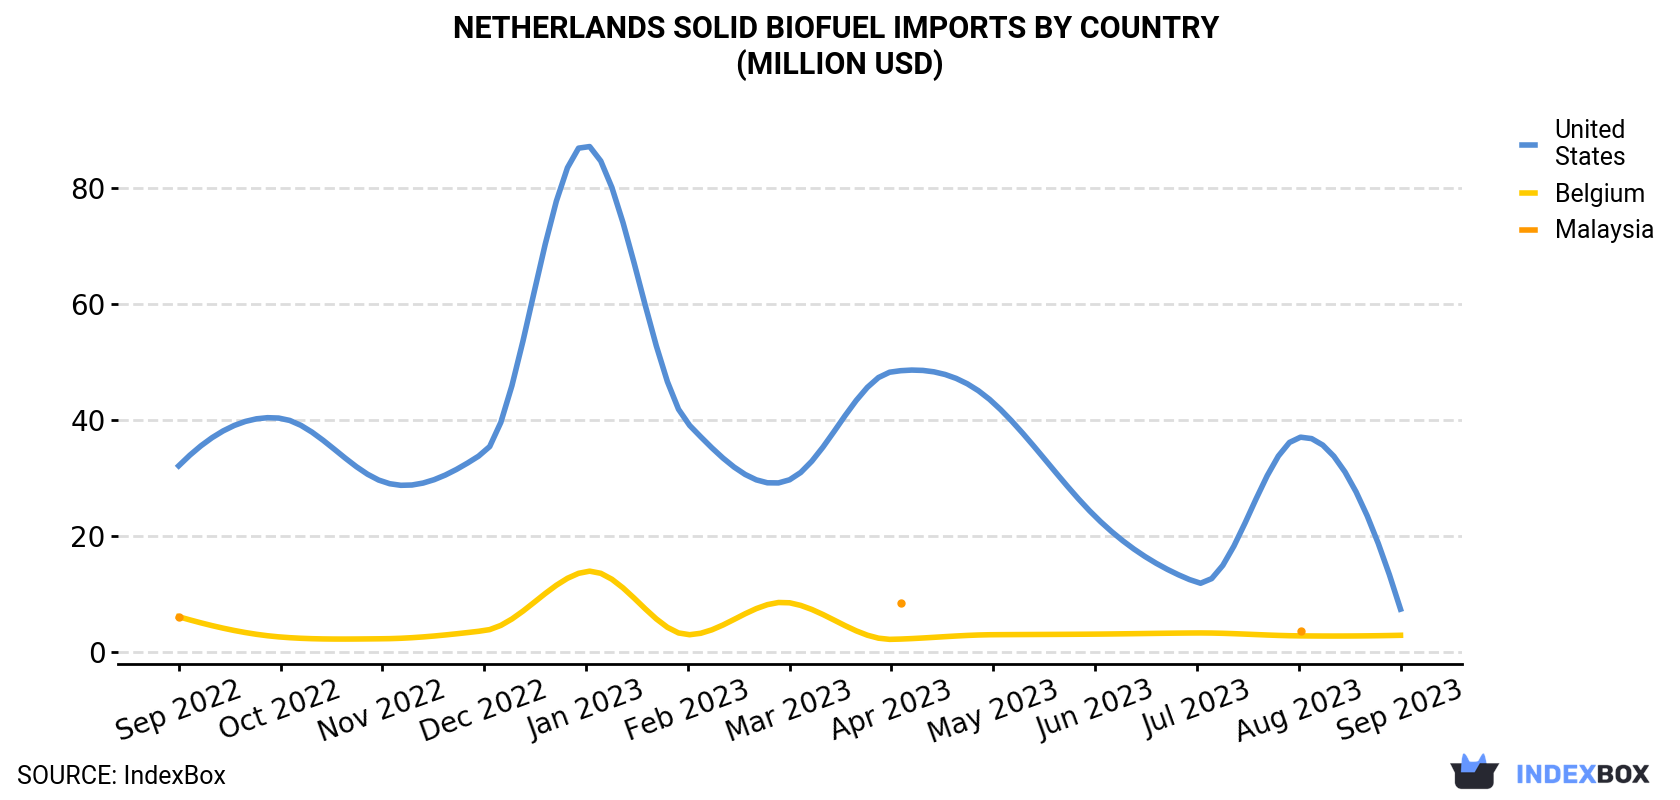 Netherlands Solid Biofuel Imports By Country (Million USD)